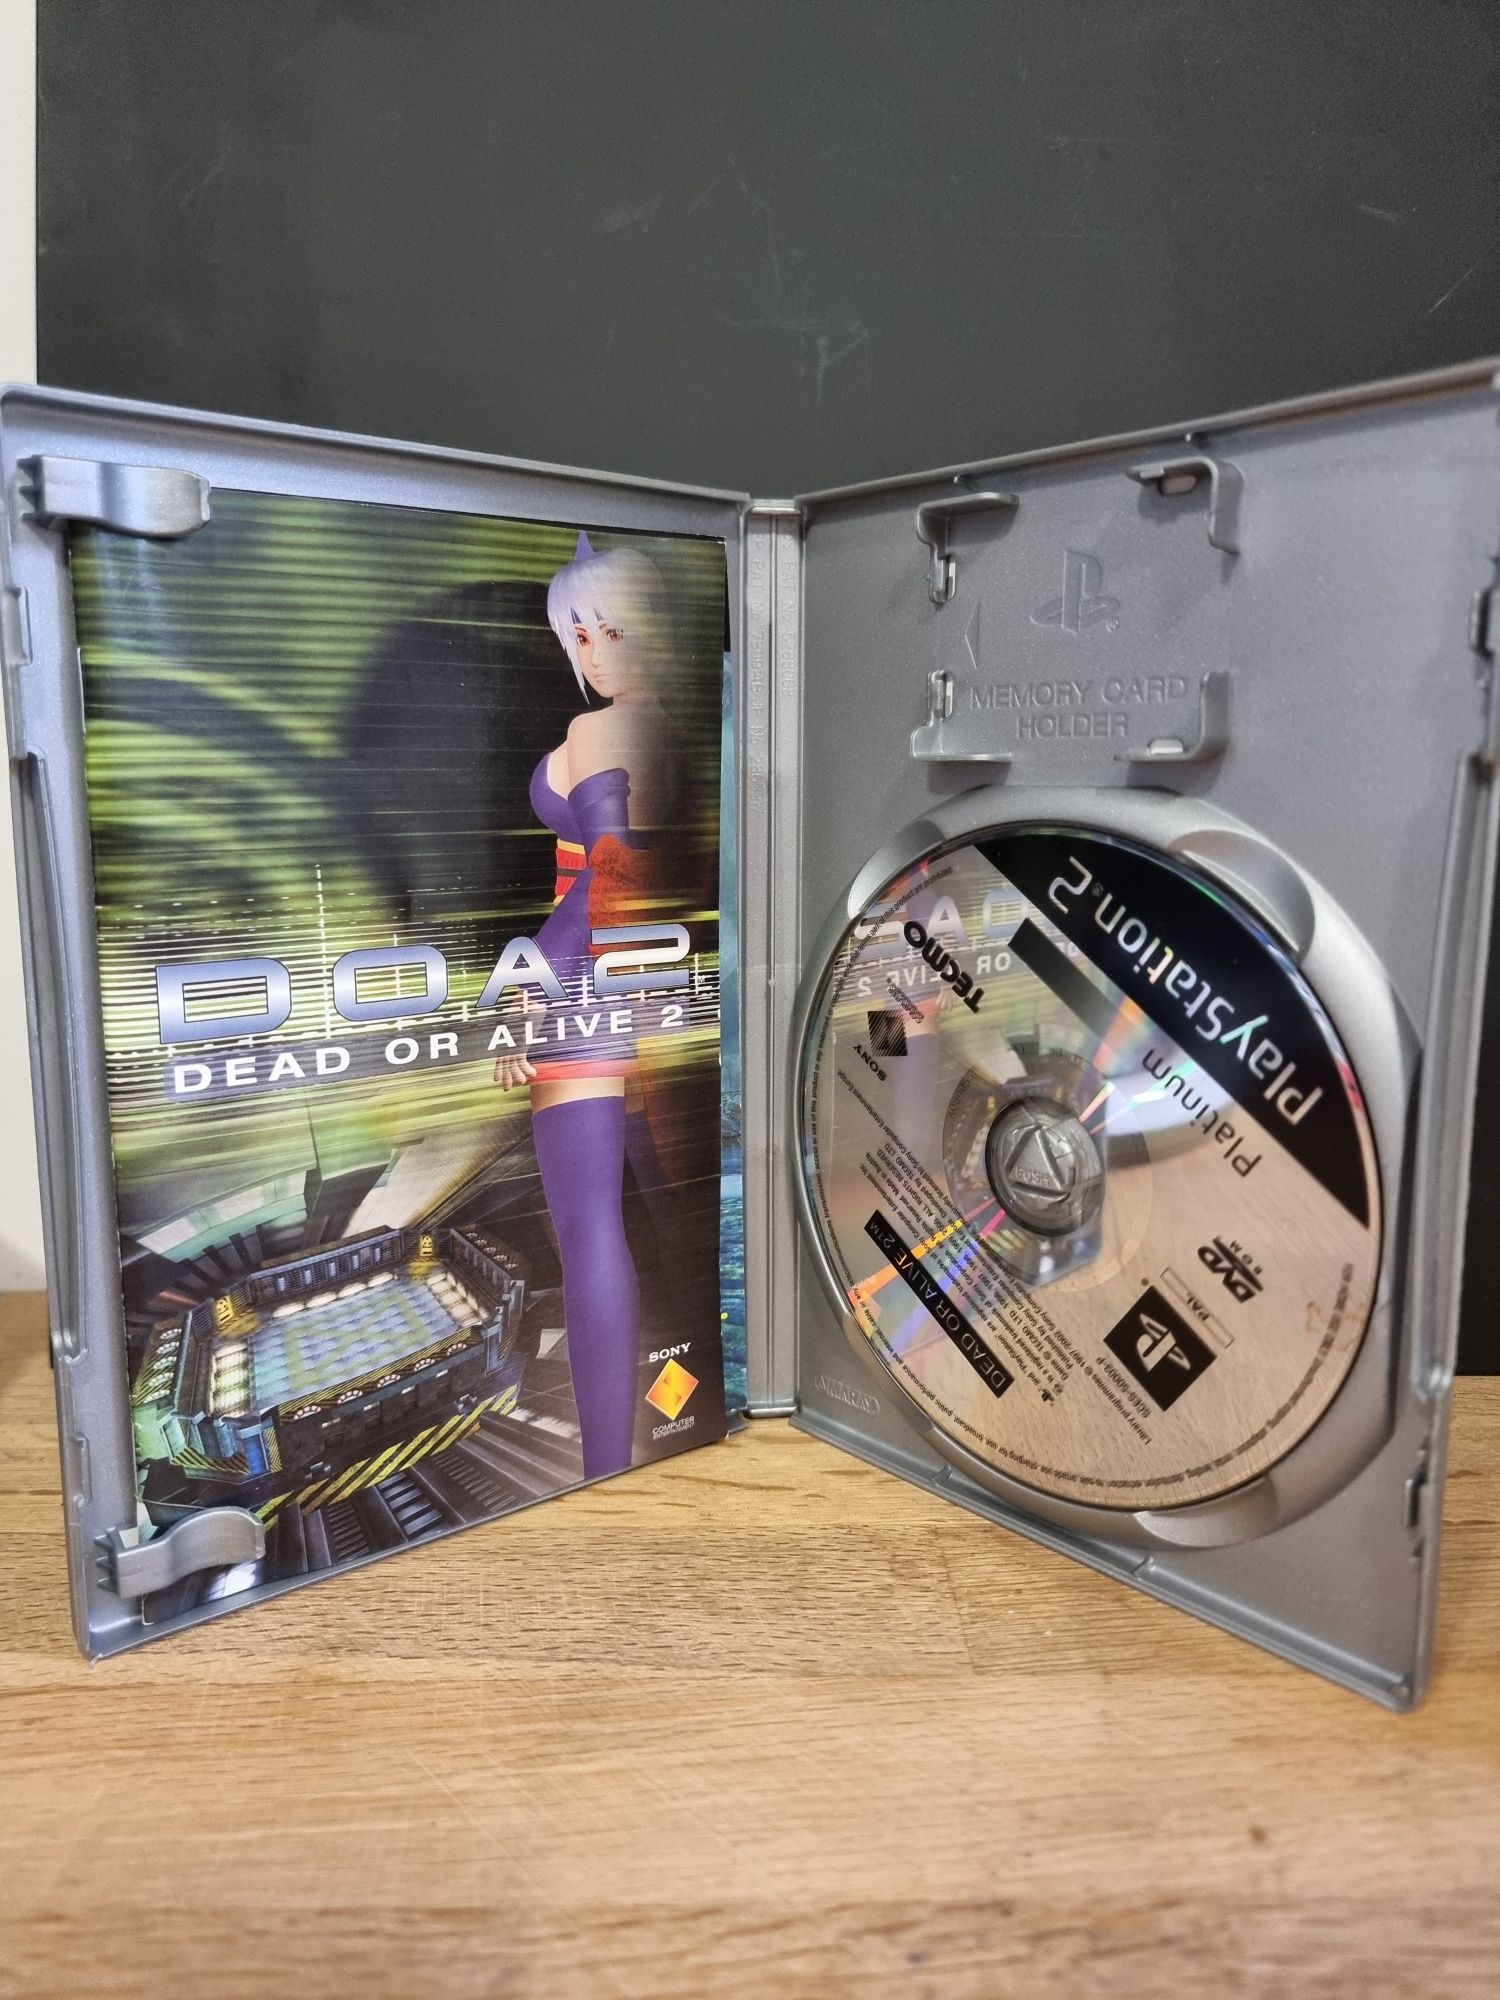 Dead or alive 2 ps2